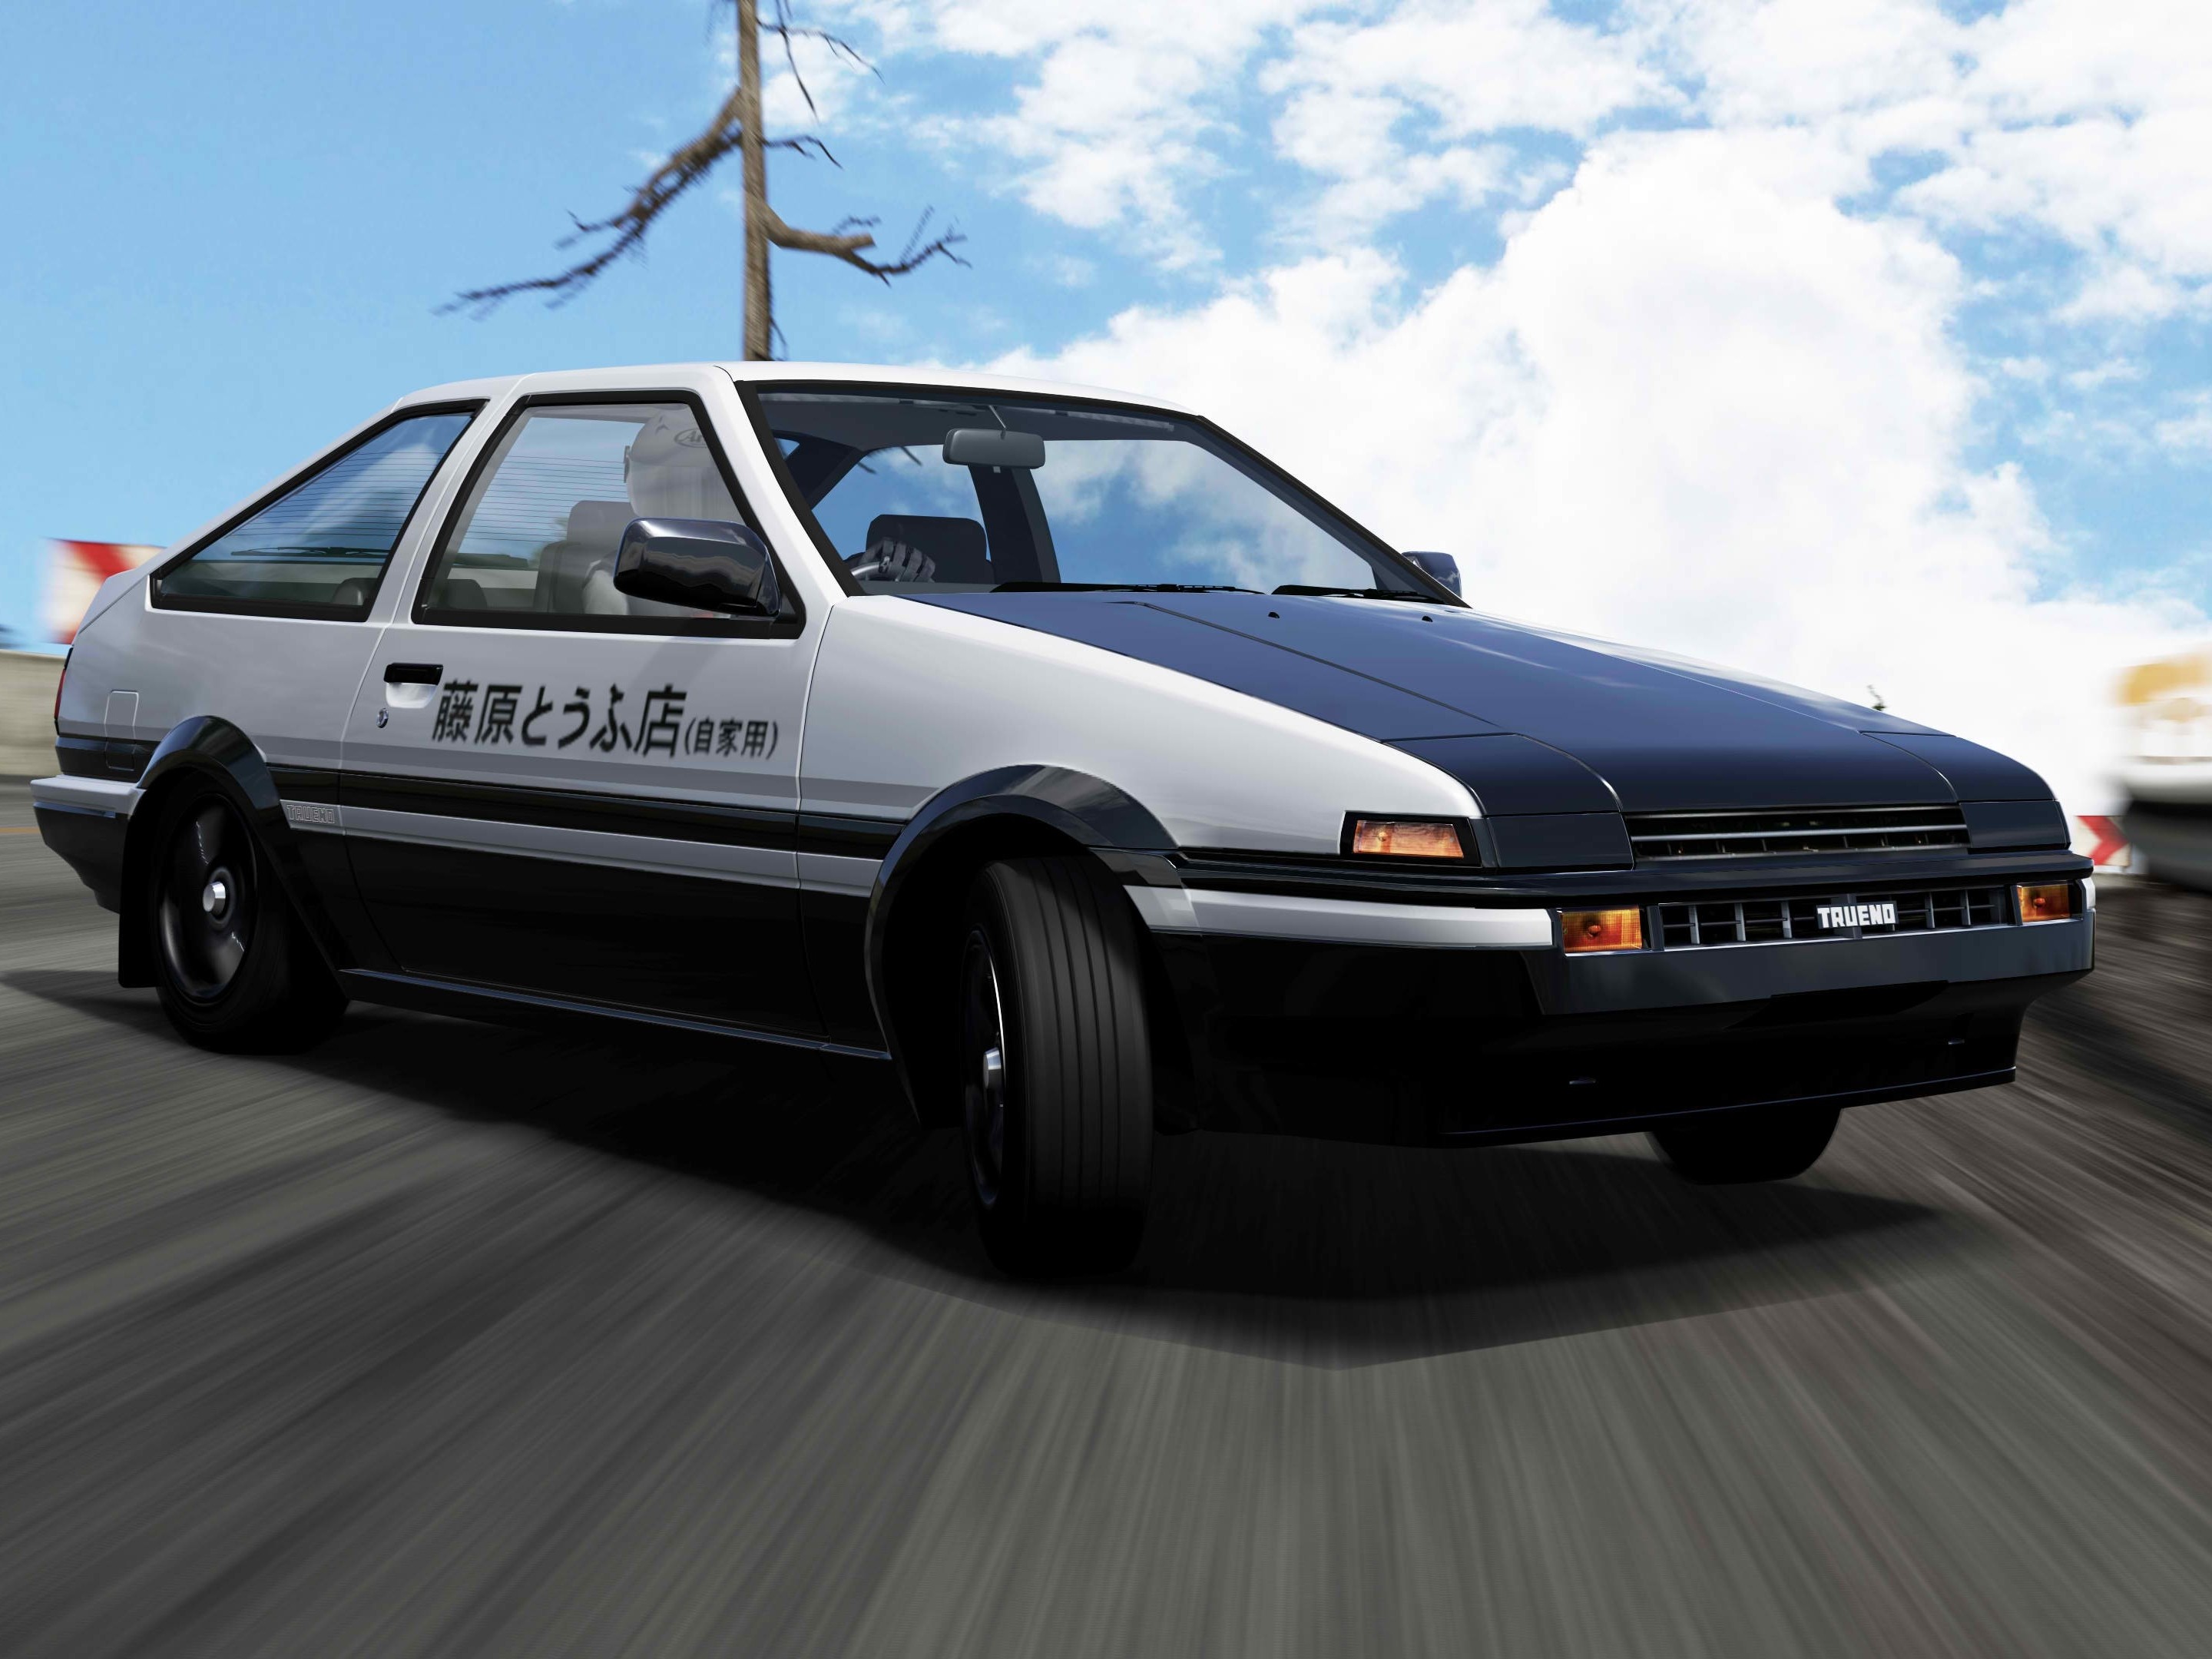 General 2880x2160 Toyota AE86 Initial D Toyota car vehicle white cars pop-up headlights Japanese cars